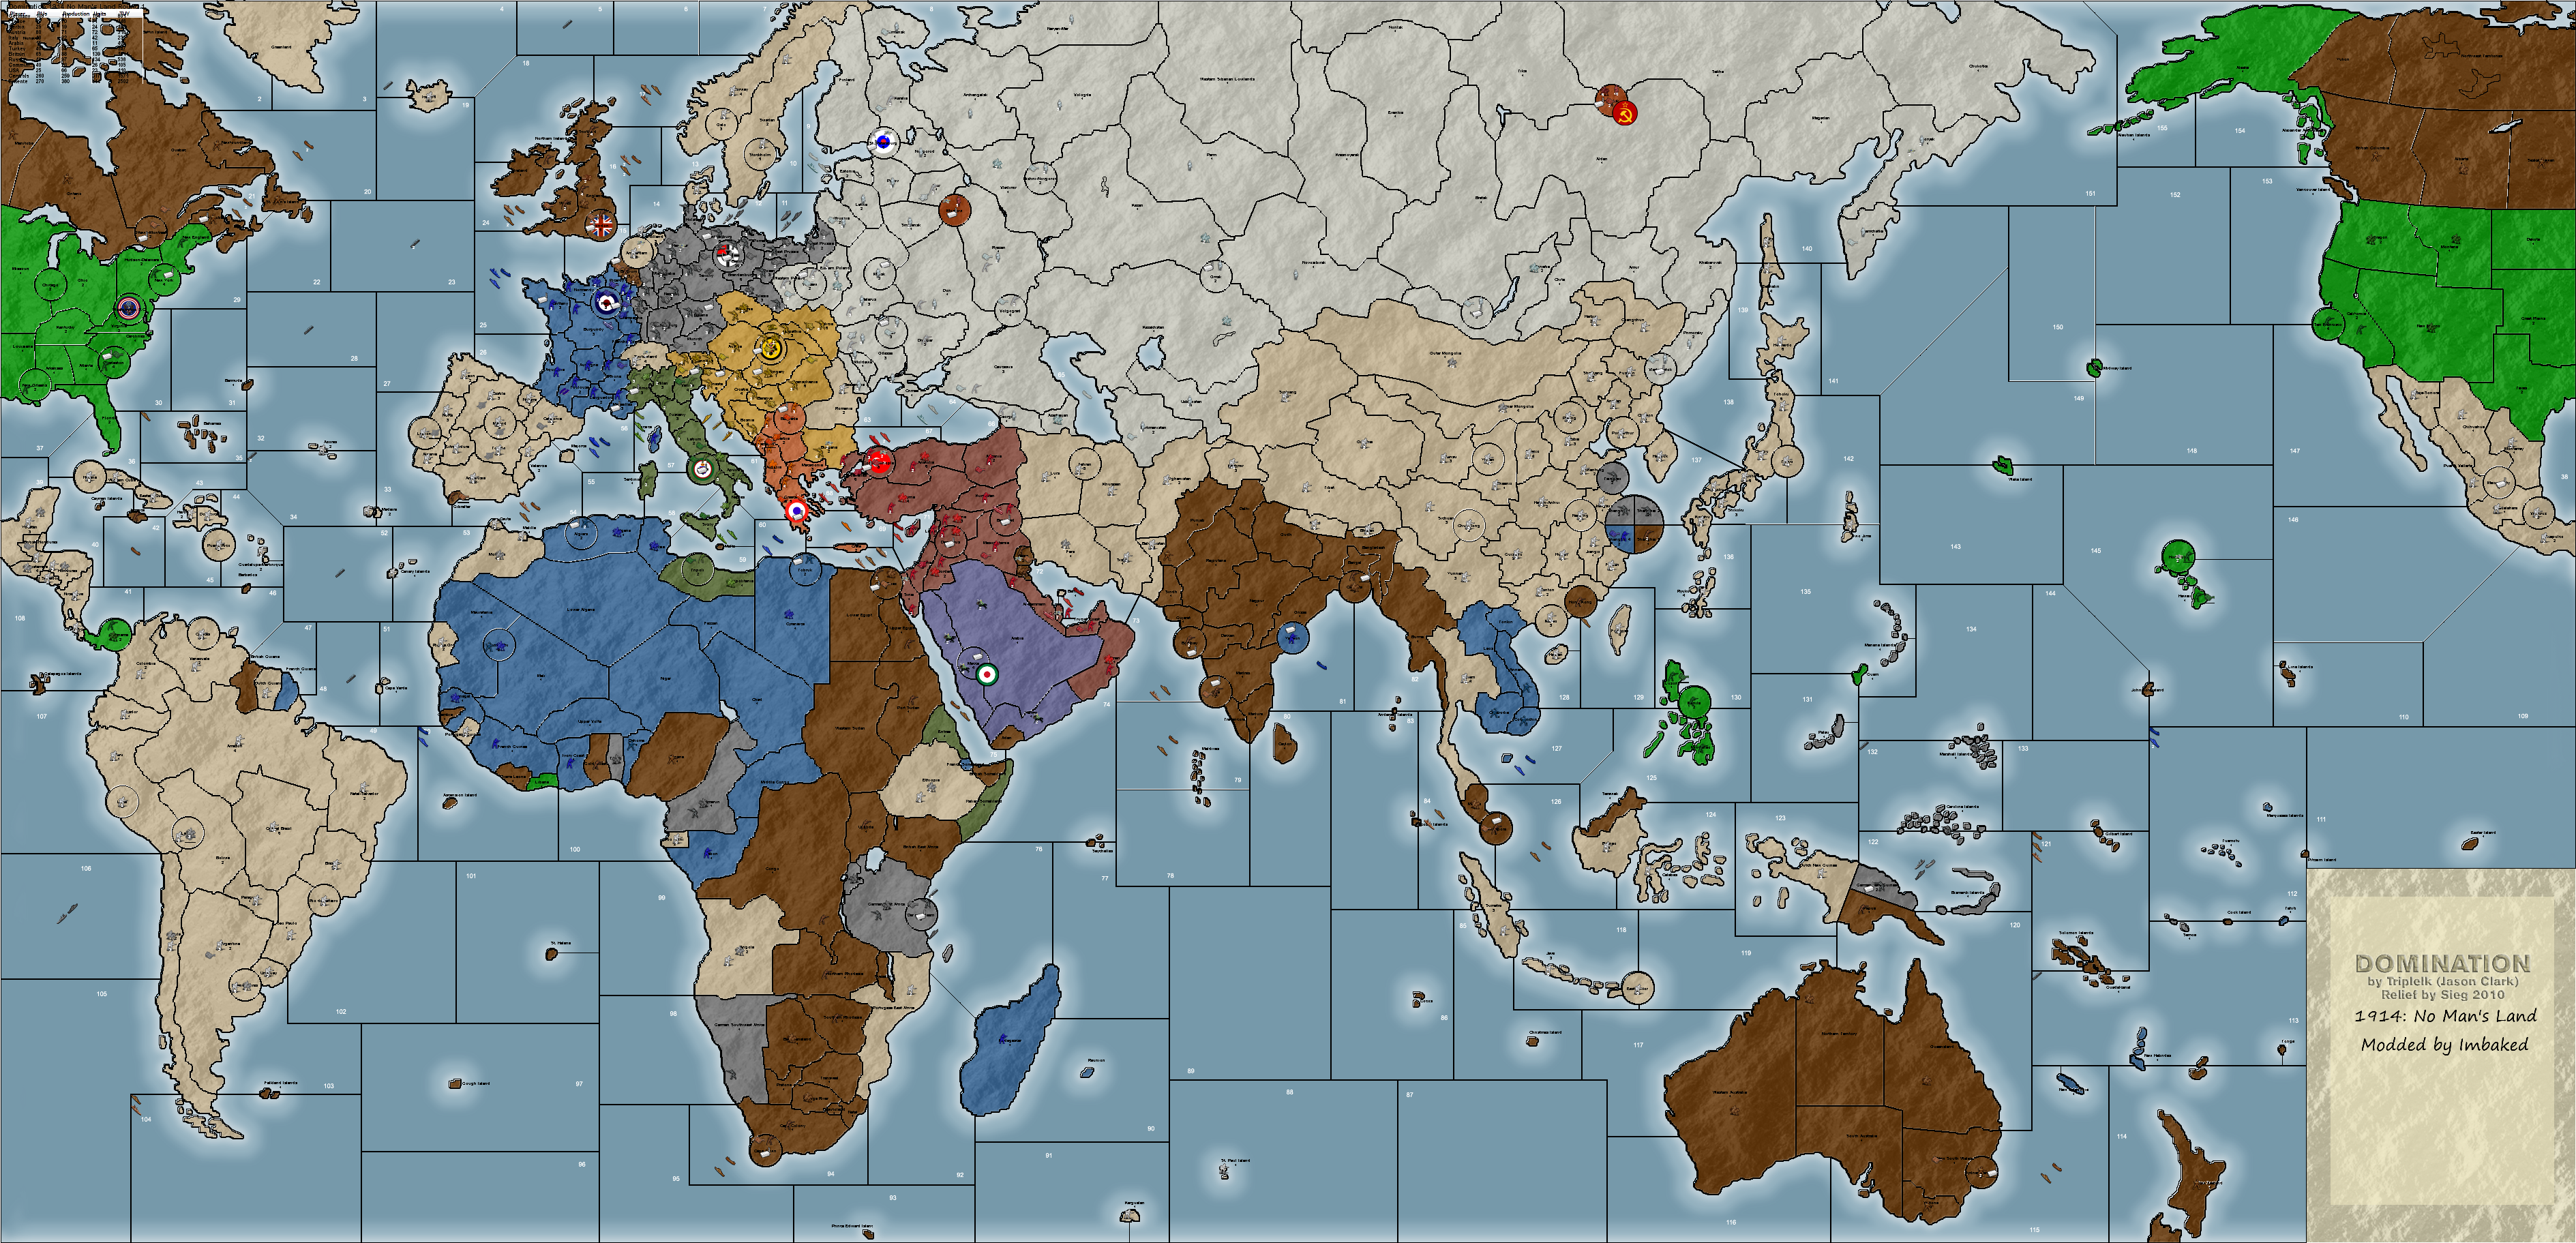 axis and allies 1914 map